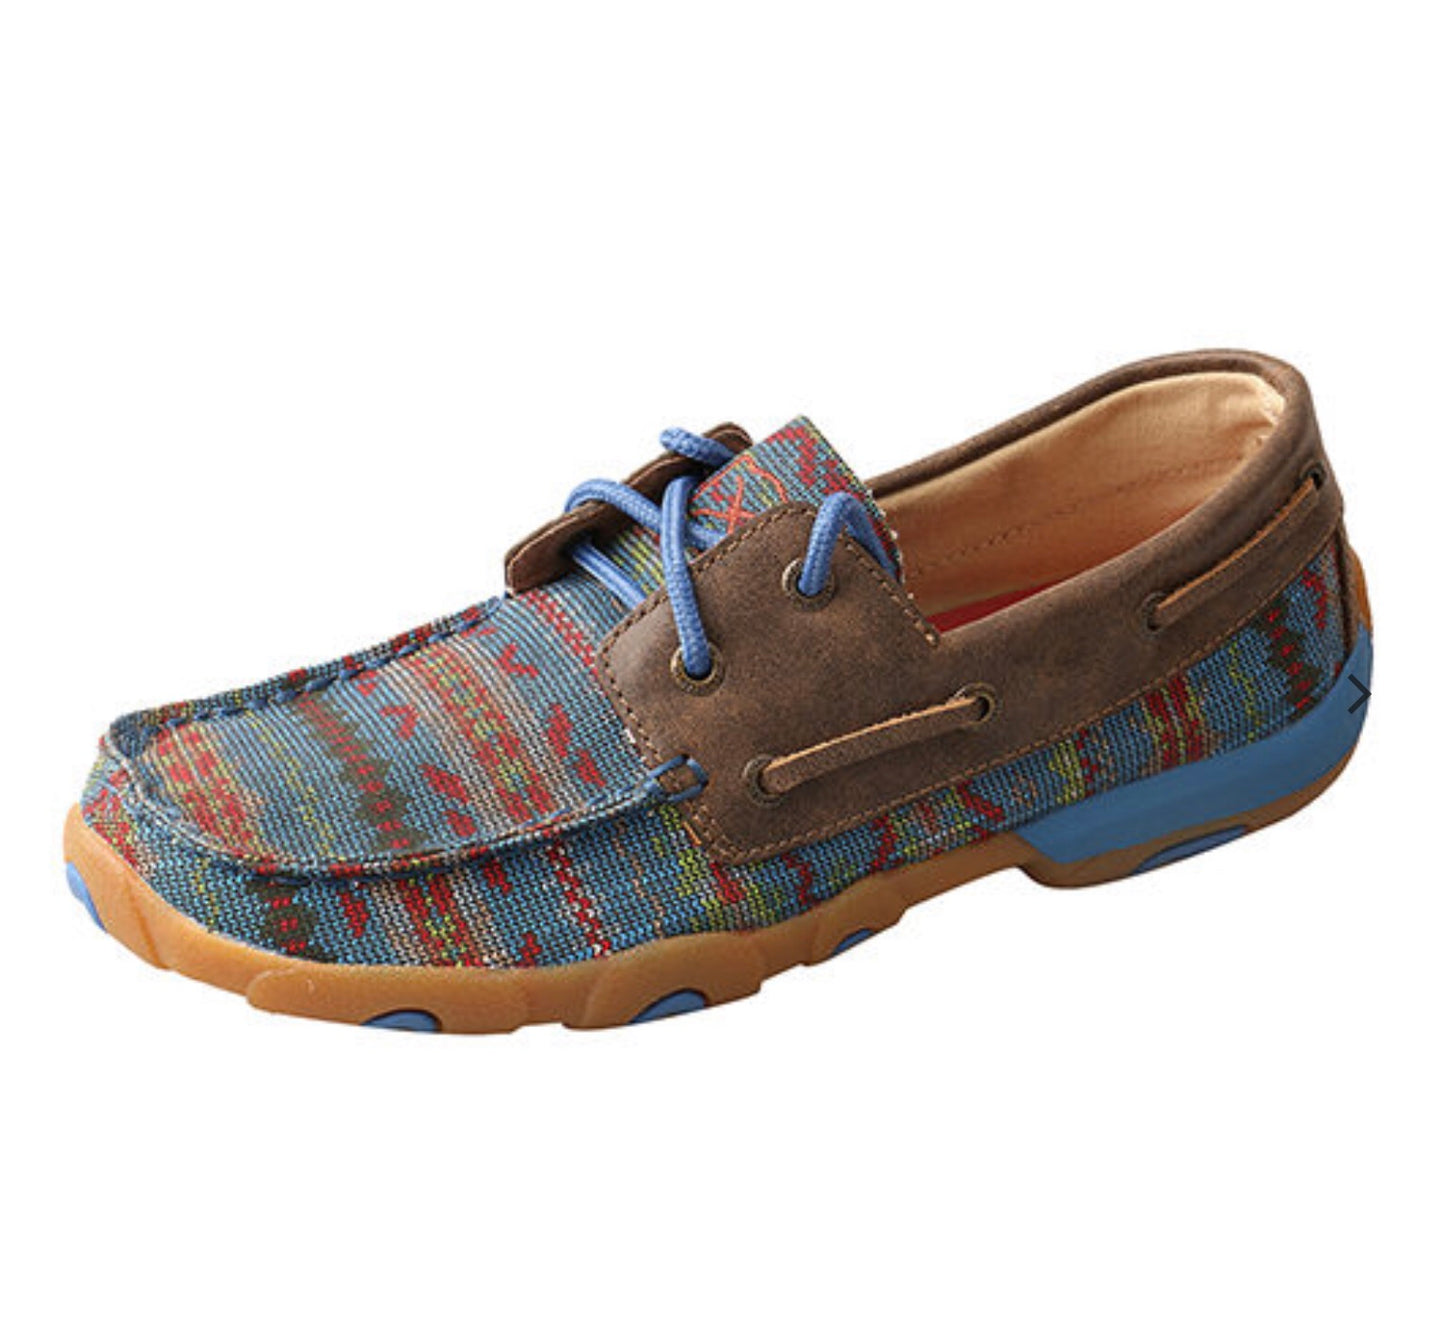 Shoes Women’s Twisted X Blue print